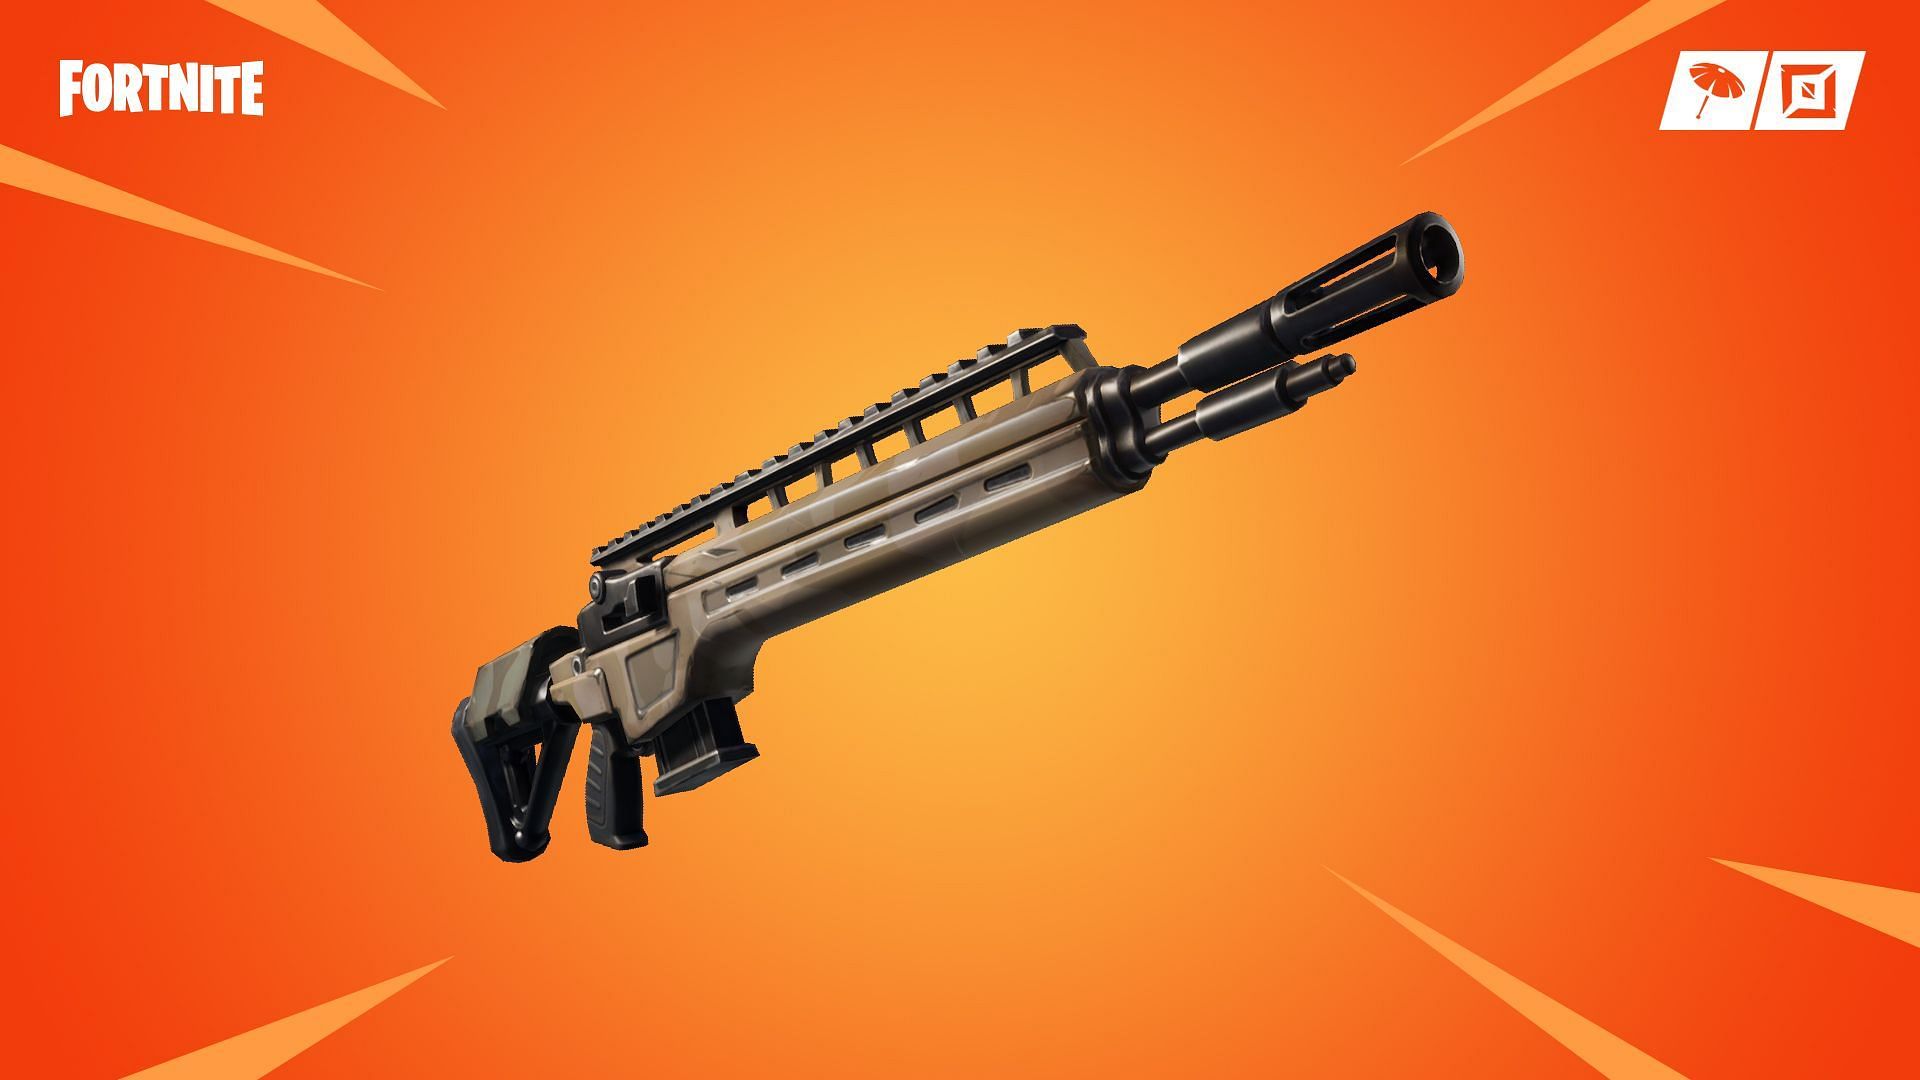 Fortnite community wants this weapon added back to the loot pool, and with good reason